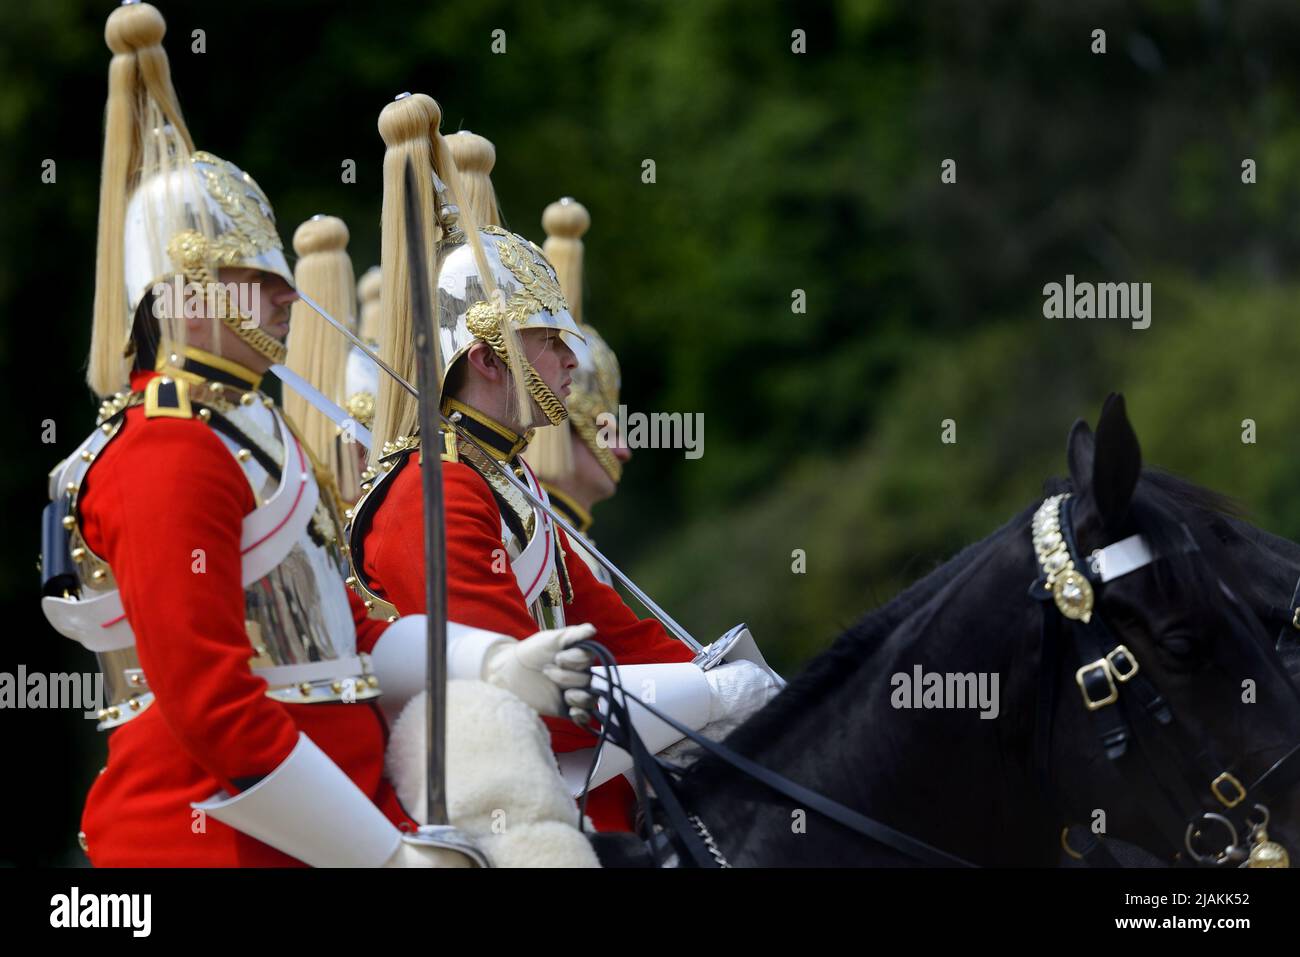 London, England, UK. Daily Changing of the Guard in Horse Guards Parade - members of the Life Guards Stock Photo